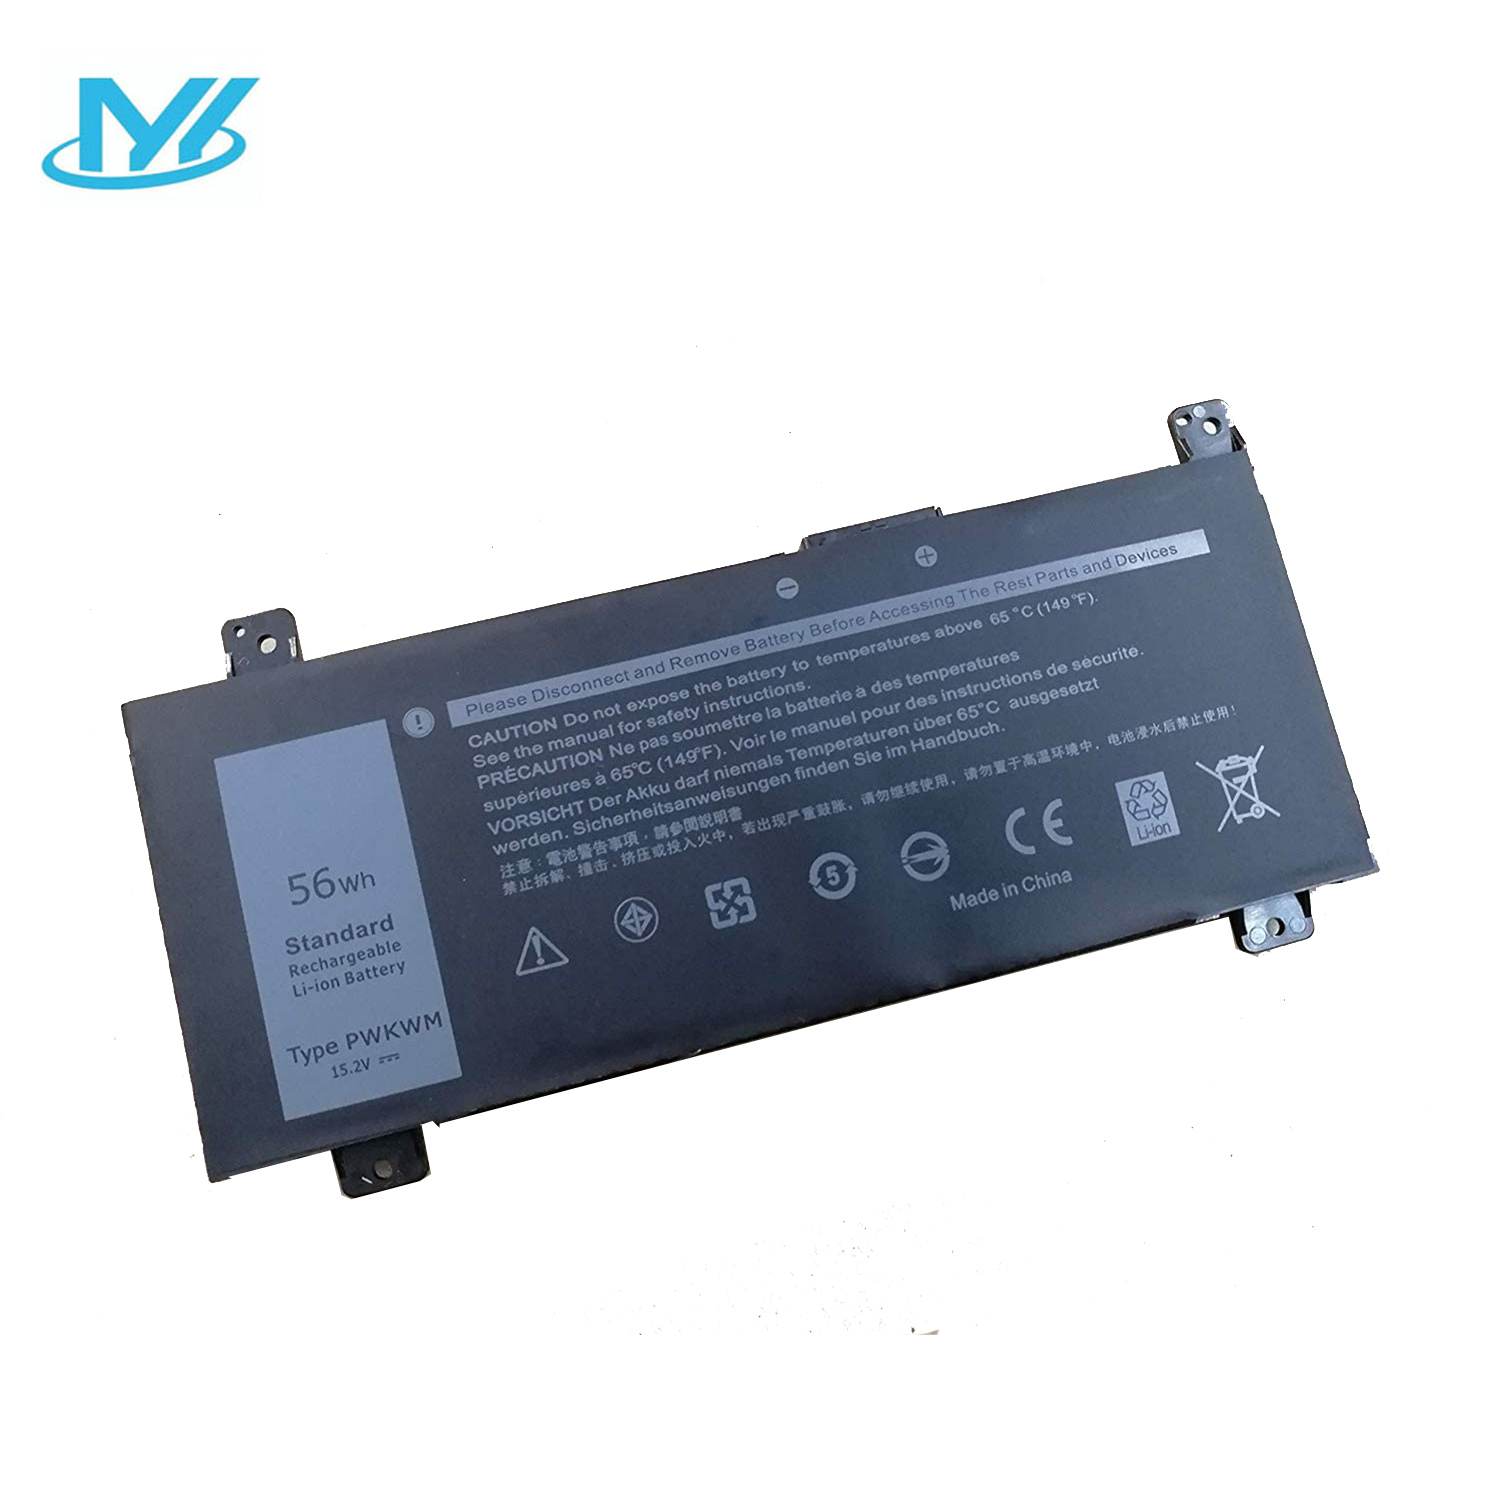 PWKWM lithium ion Notebook battery Laptop battery 15.2 V 56Wh for Dell laptop Inspiron 14-7466 7467 14-7467 7000